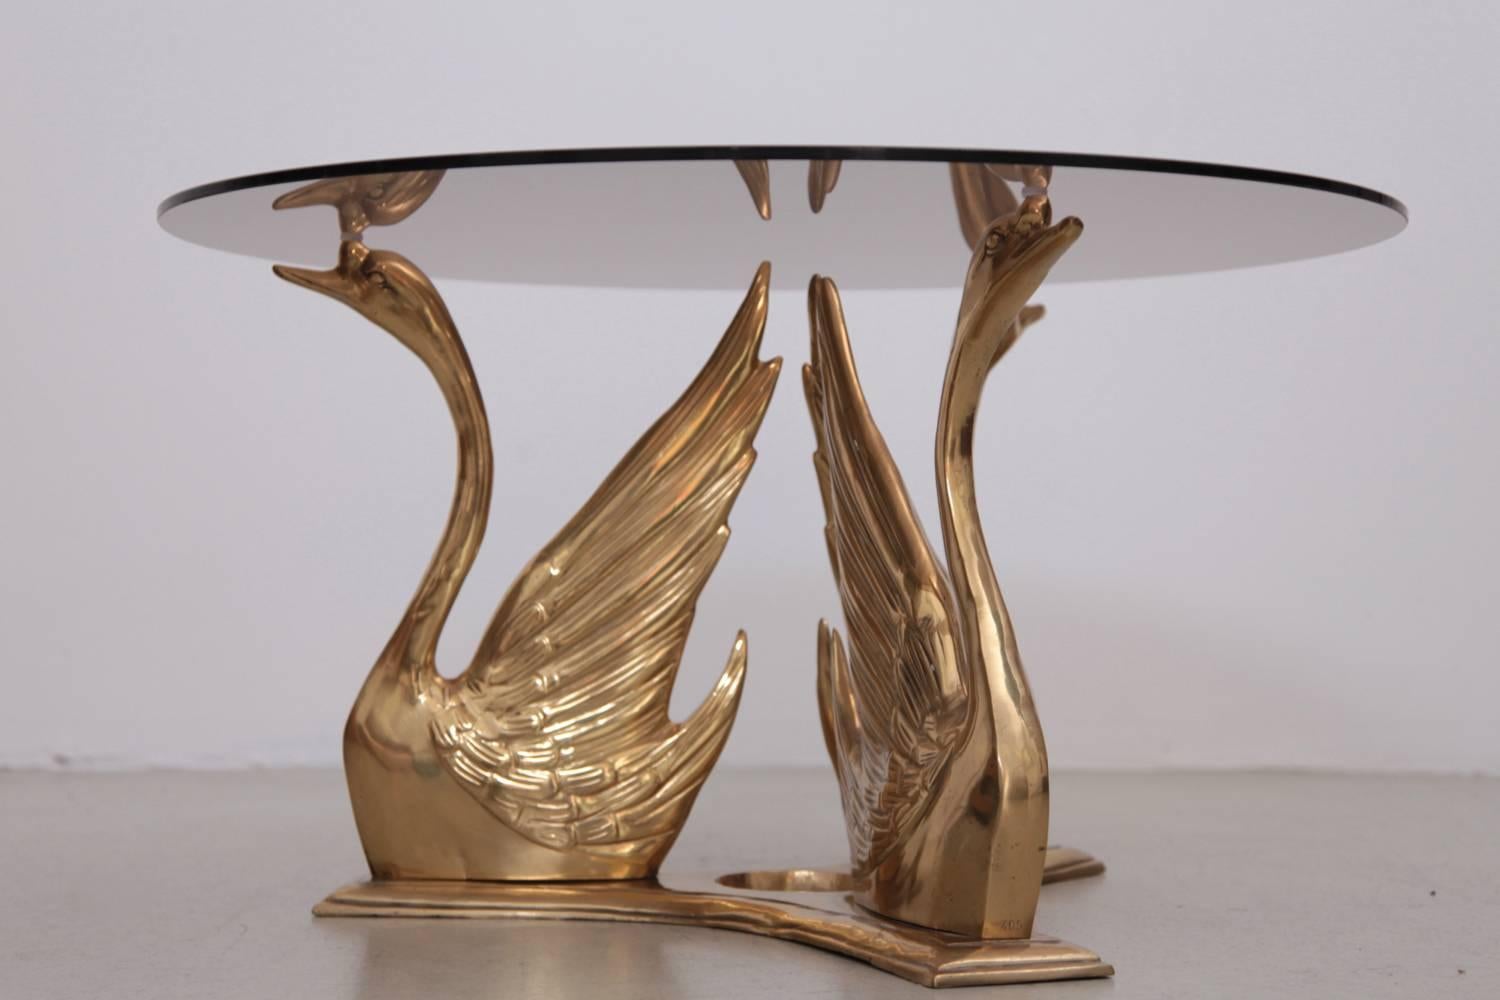 Very elegant coffee or side table in brass and glass. The glass table top is holded by swans. The table is a real eyecatcher.

